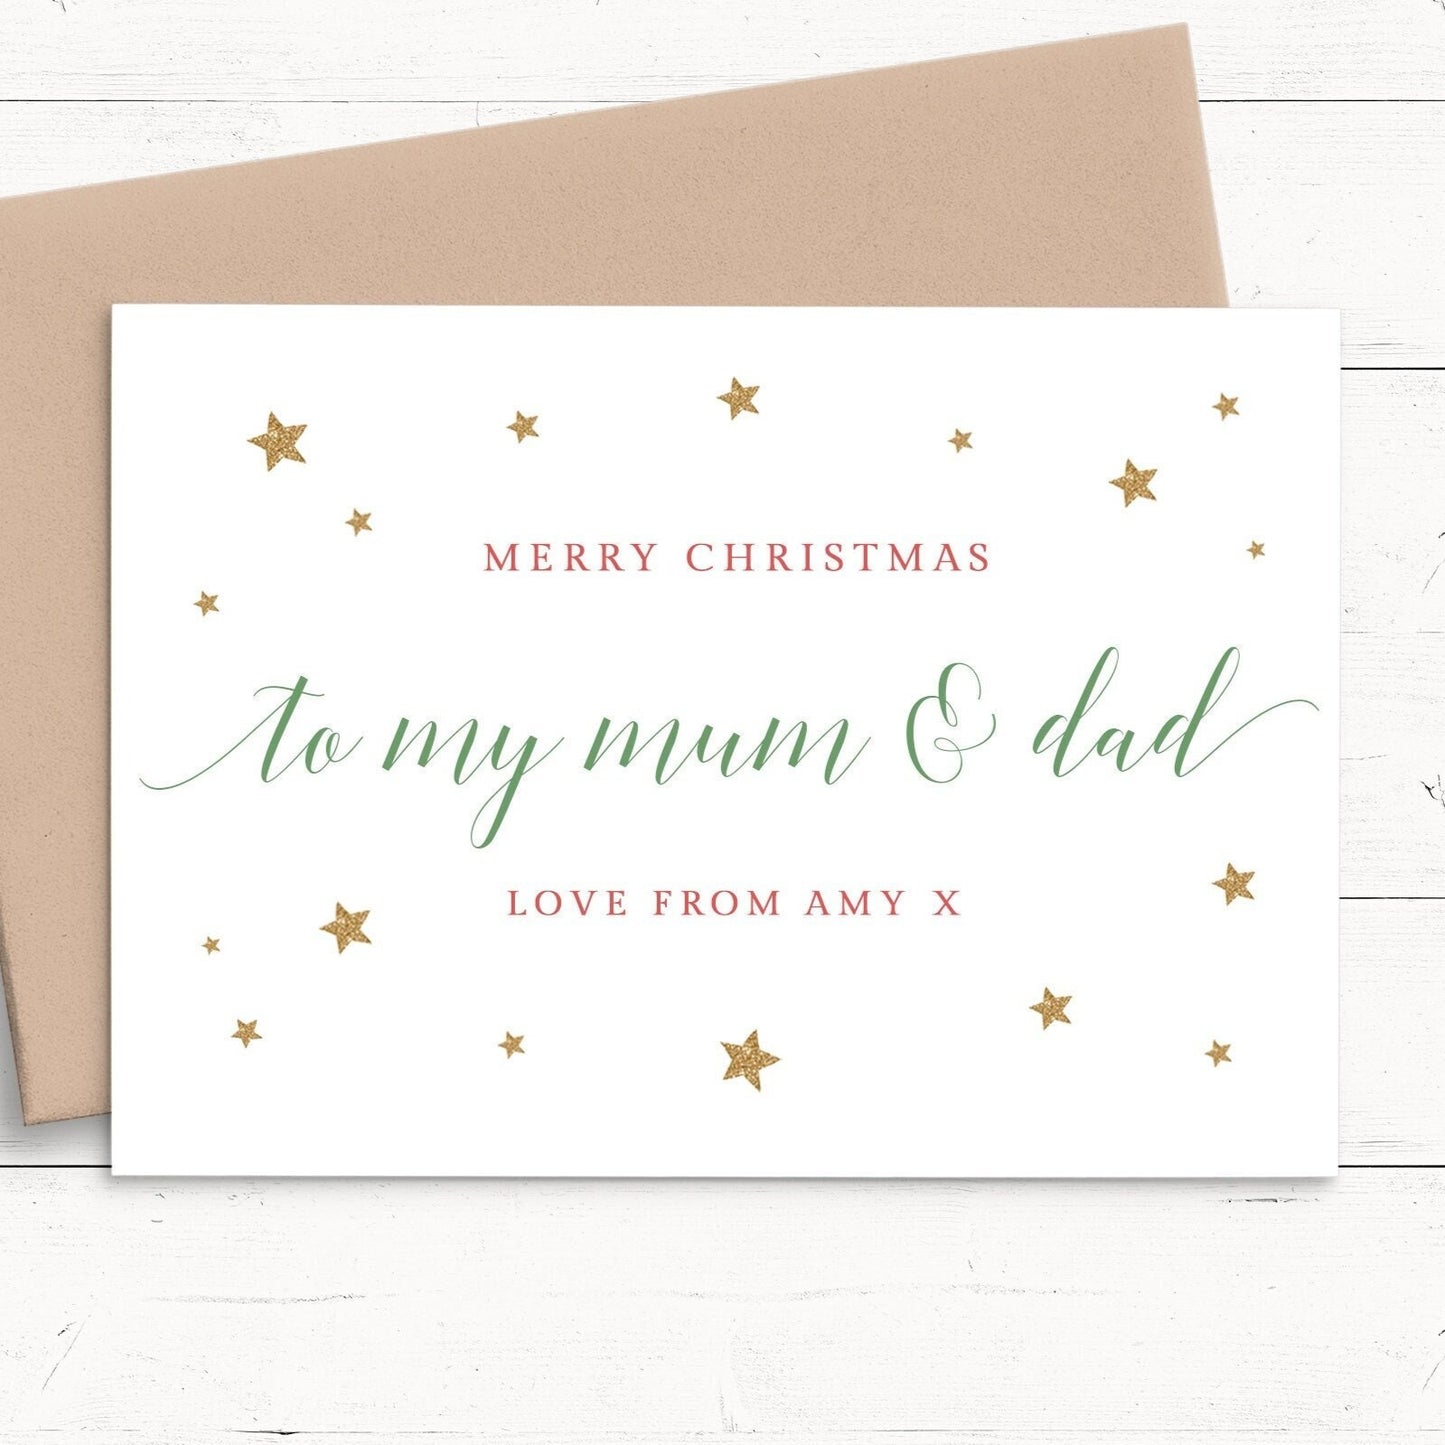 merry christmas mum and dad personalised christmas card matte white cardstock kraft brown envelope man woman father mother parents